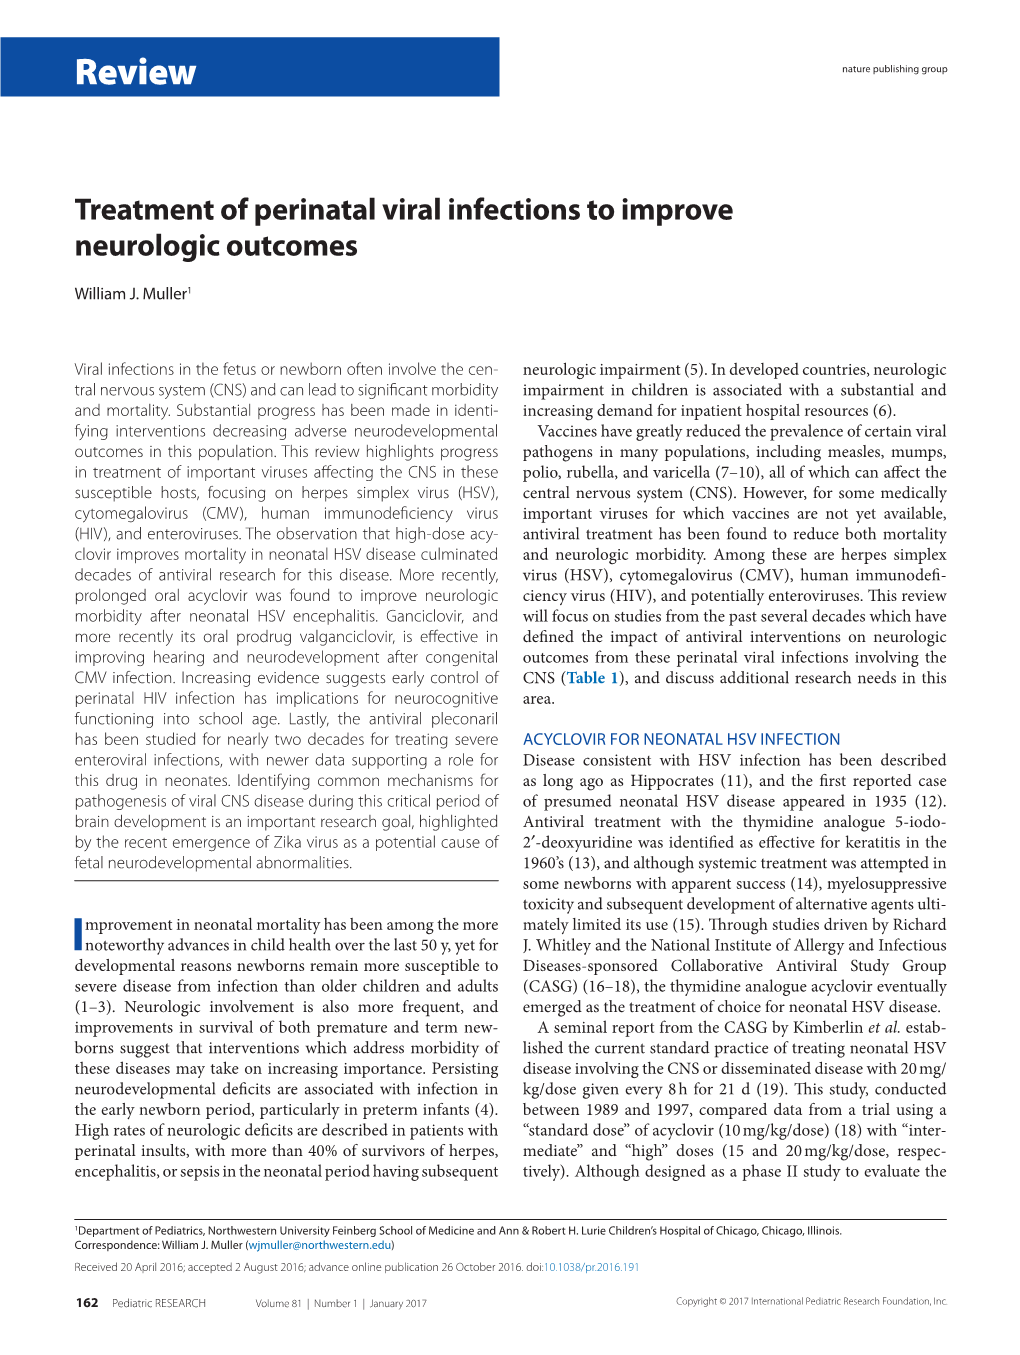 Treatment of Perinatal Viral Infections to Improve Neurologic Outcomes